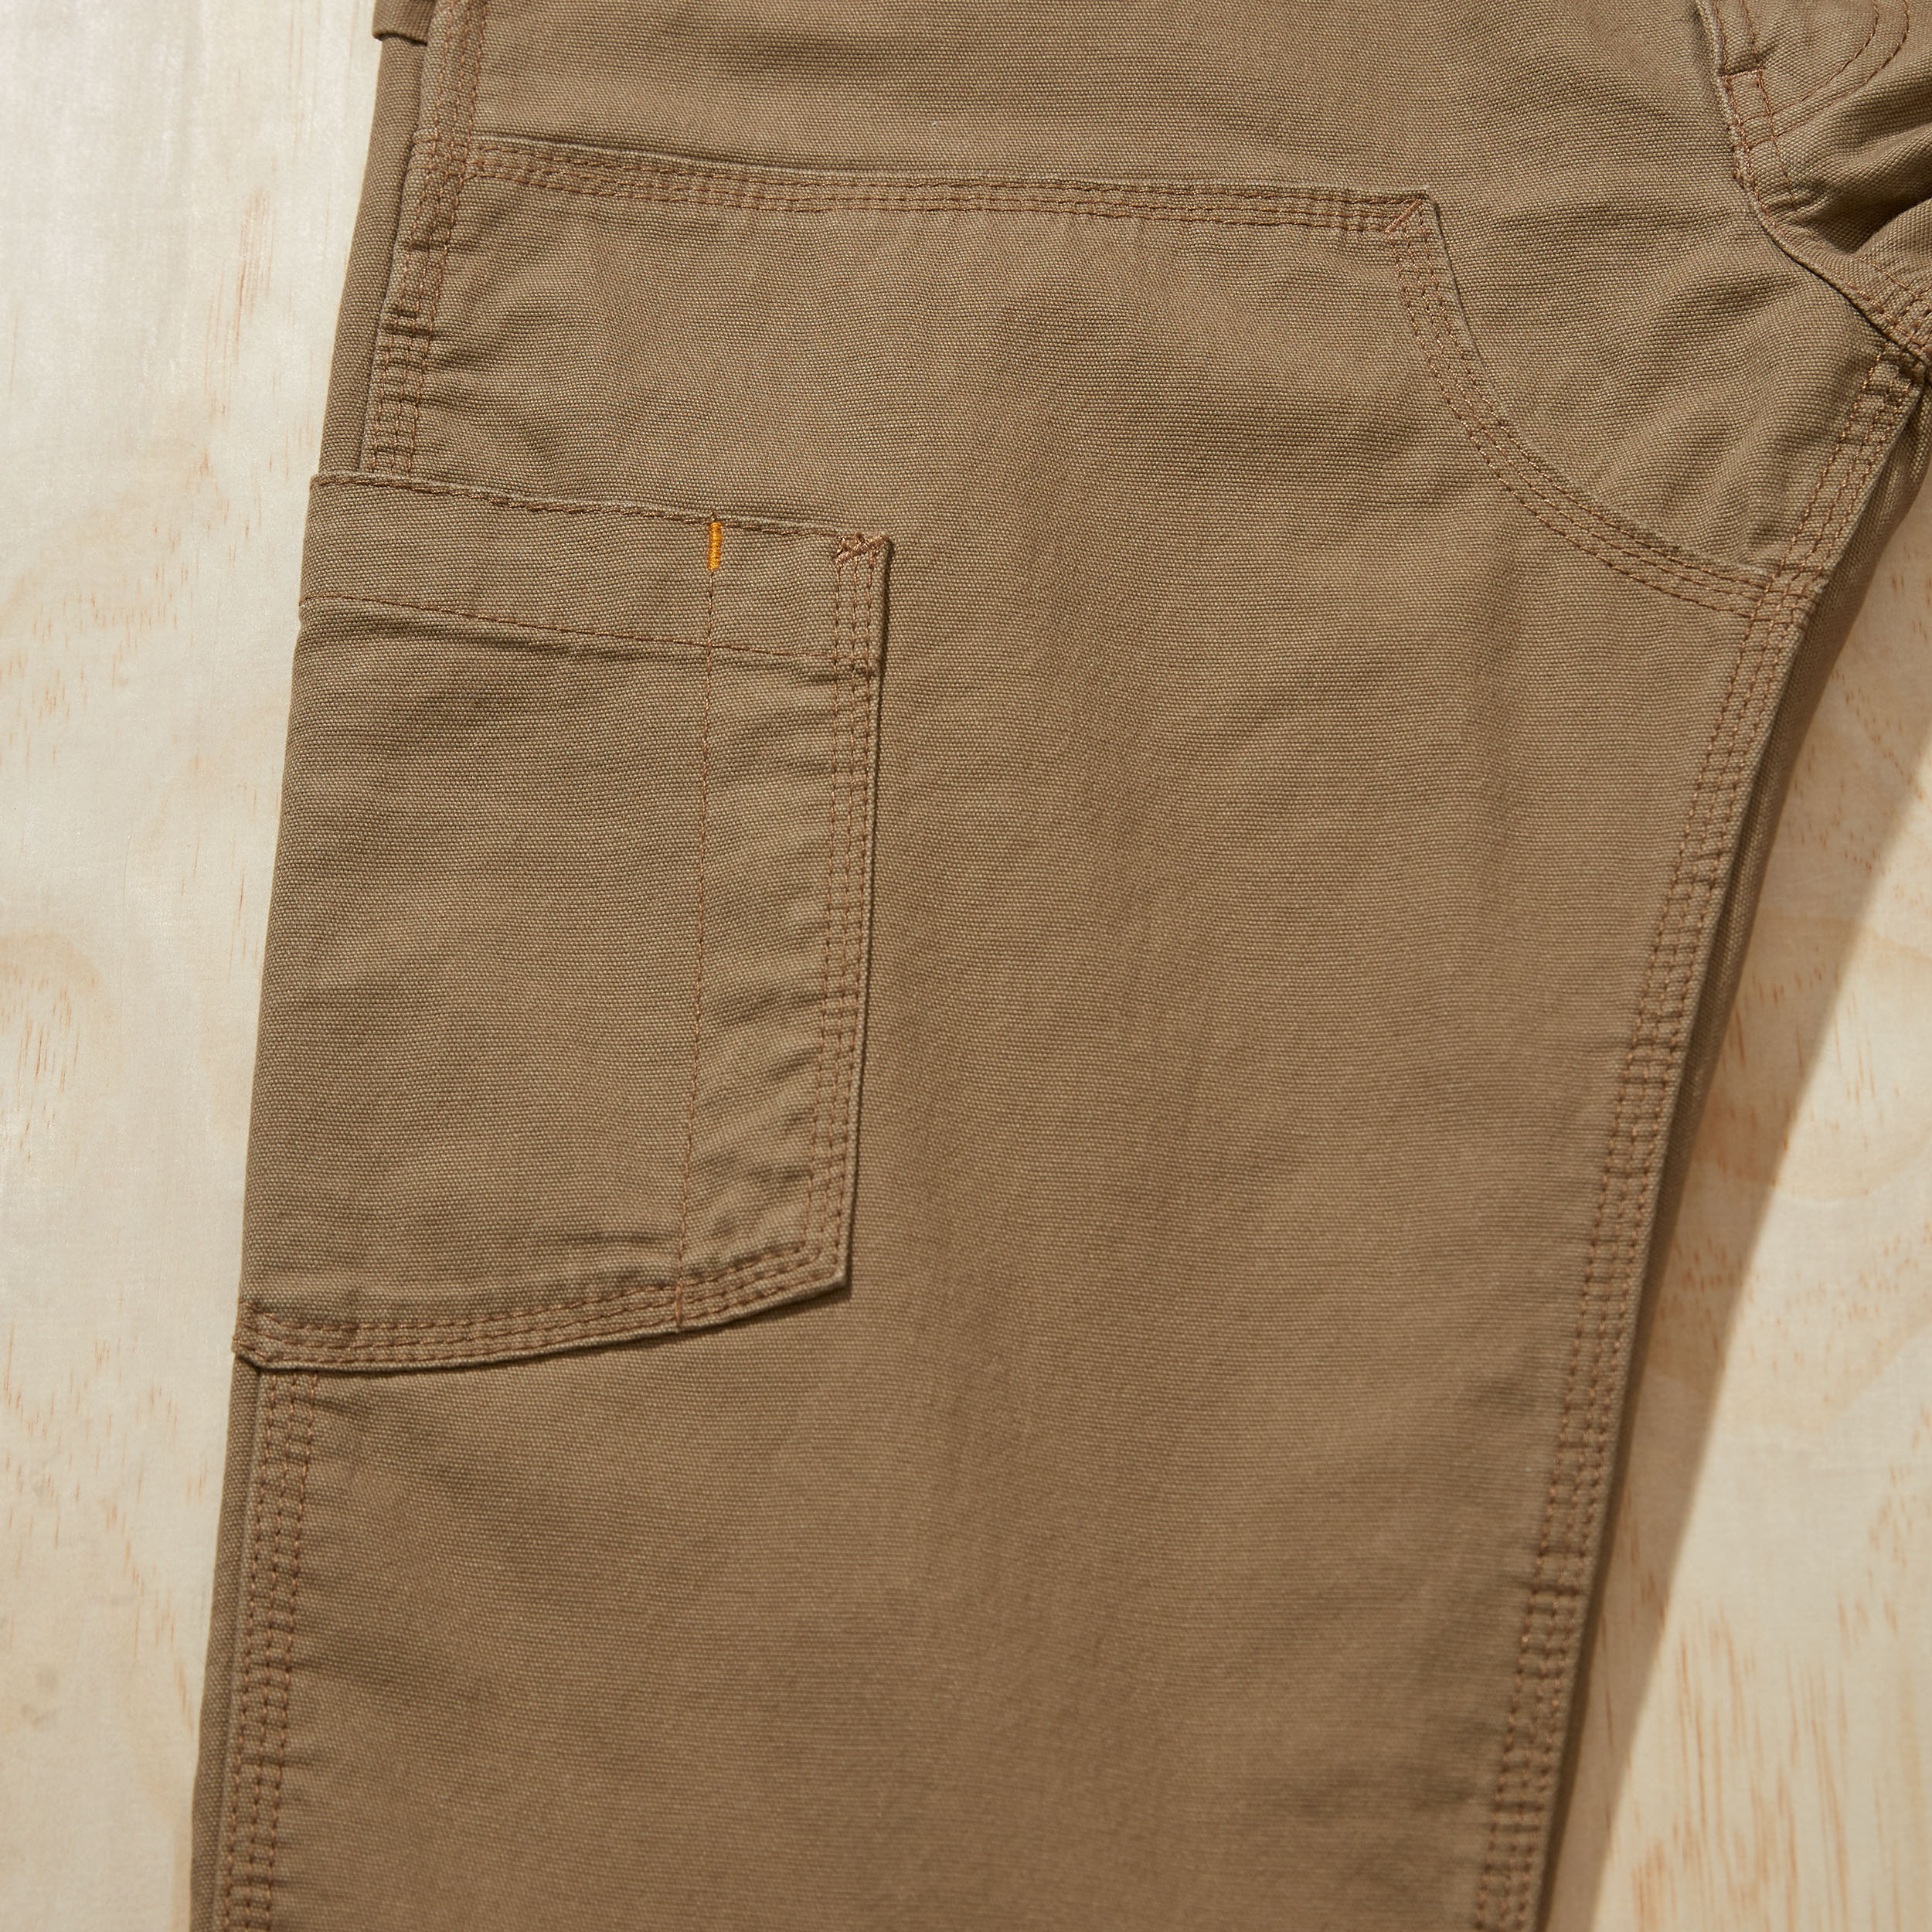 Ariat Men's Rebar M4 Low Rise Durastretch Made Tough Double Front Stackable Straight Leg Pant - image 3 of 3